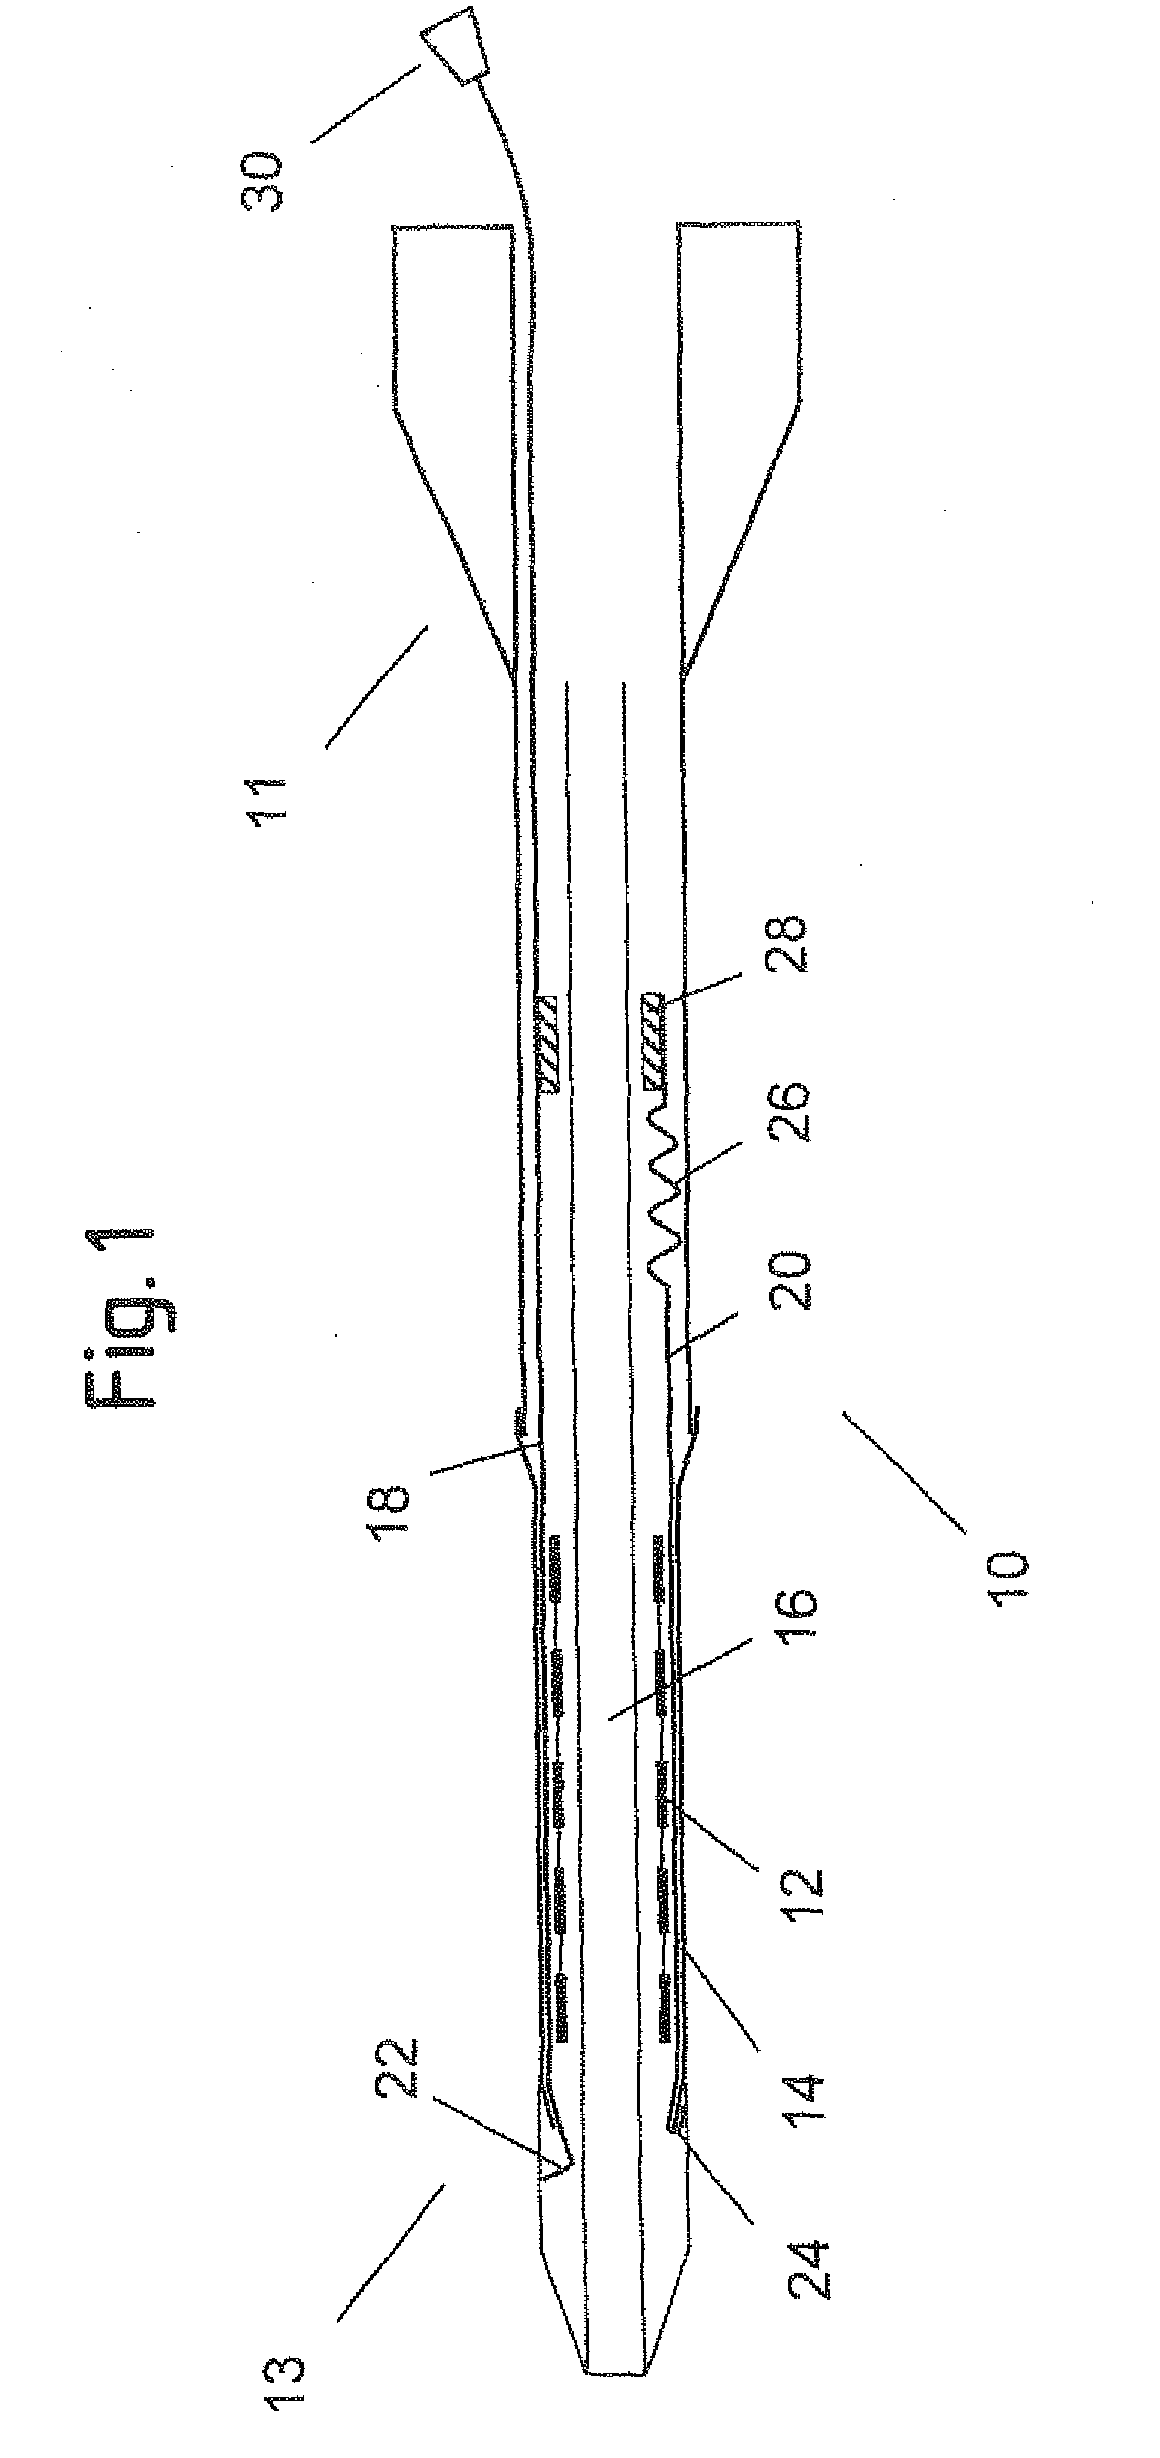 Delivery system for a self-expanding device for placement in a bodily lumen